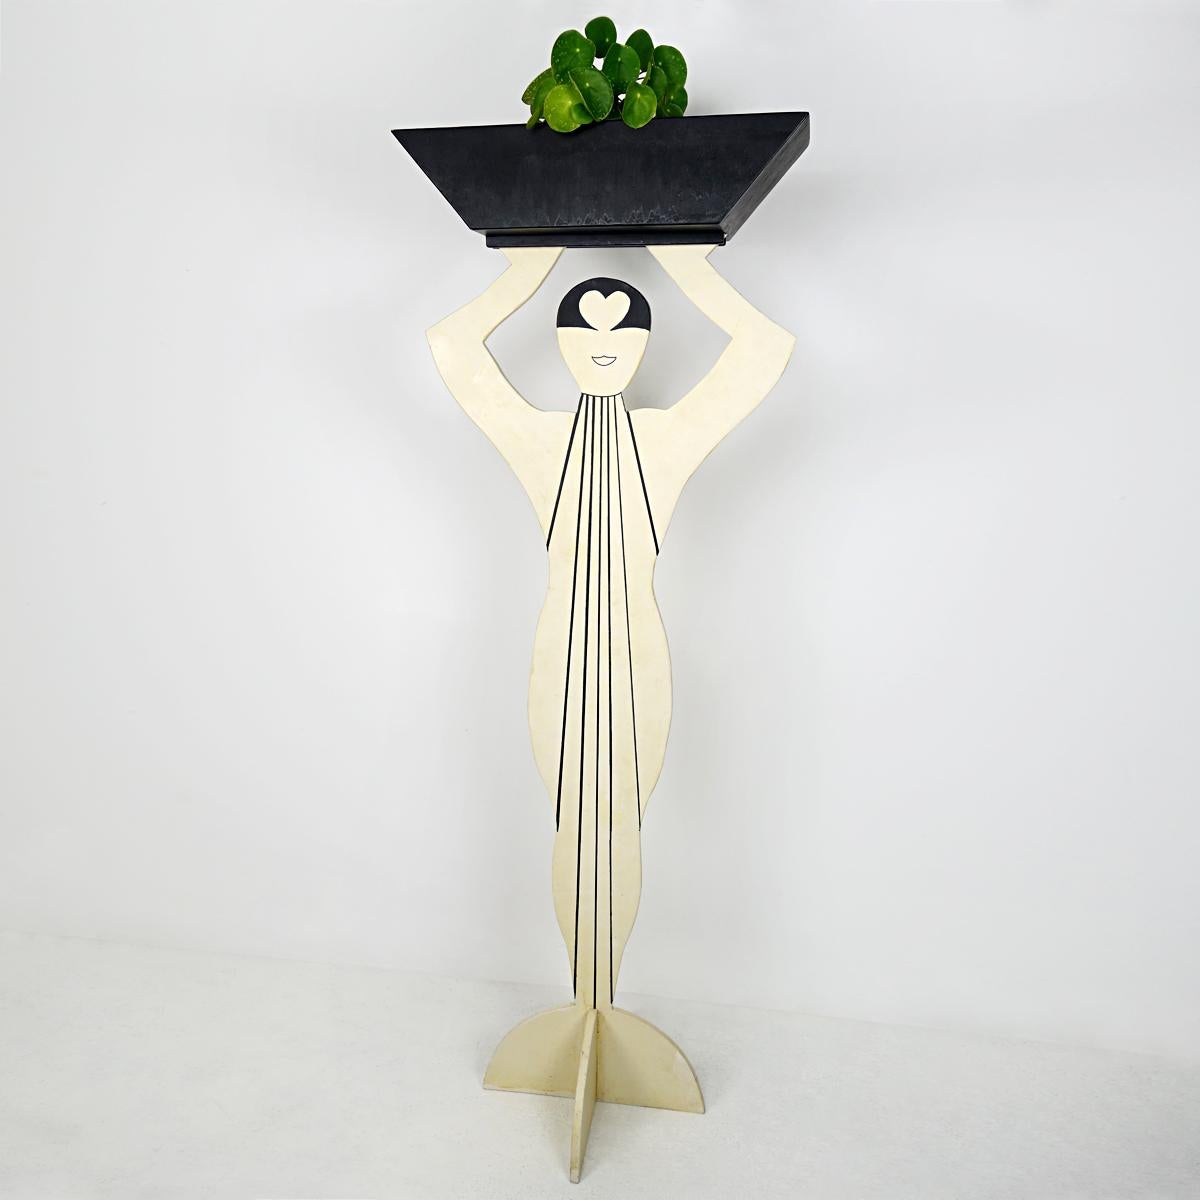 This large stylized plant stand is made of wood. It has the shape of an elegant lady dressed up in the style of the Art Deco heydays. Above her head she carries a planter that serves as the cachepot.
The object is painted on both sides so it can be